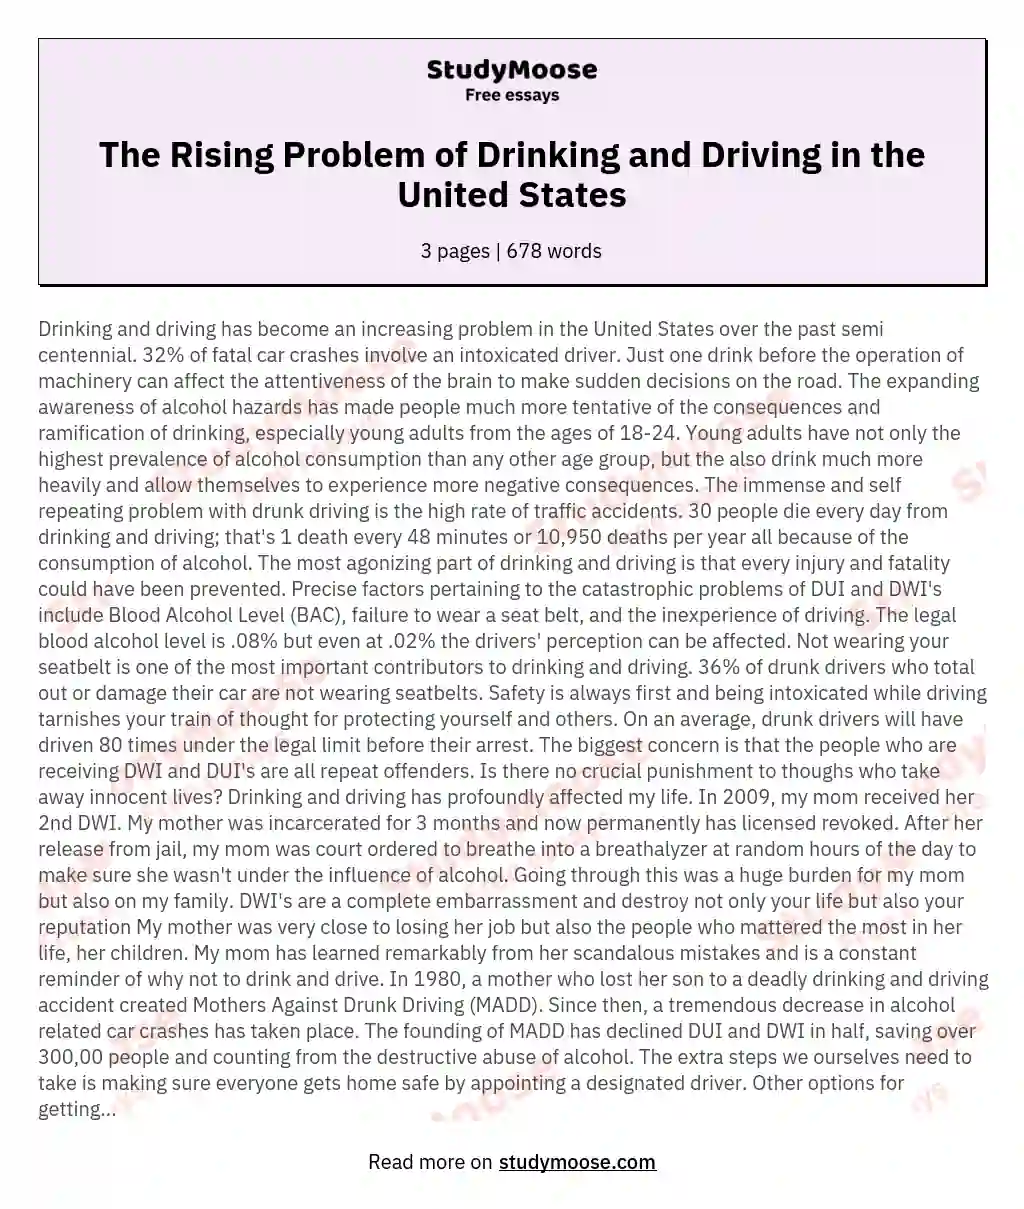 The Rising Problem of Drinking and Driving in the United States essay